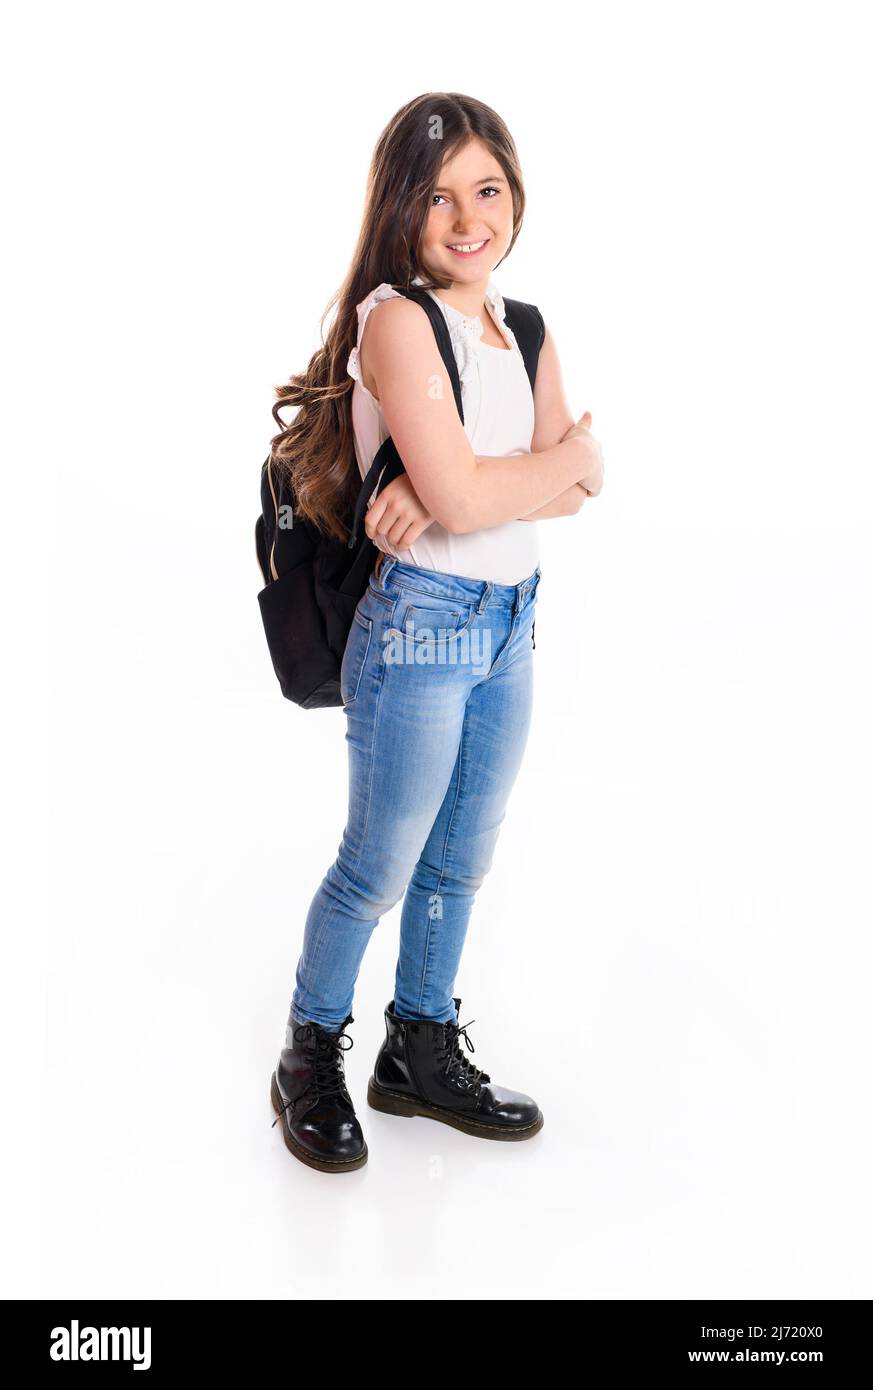 Cute smiling schoolgirl in uniform standing on white background with agenda Stock Photo